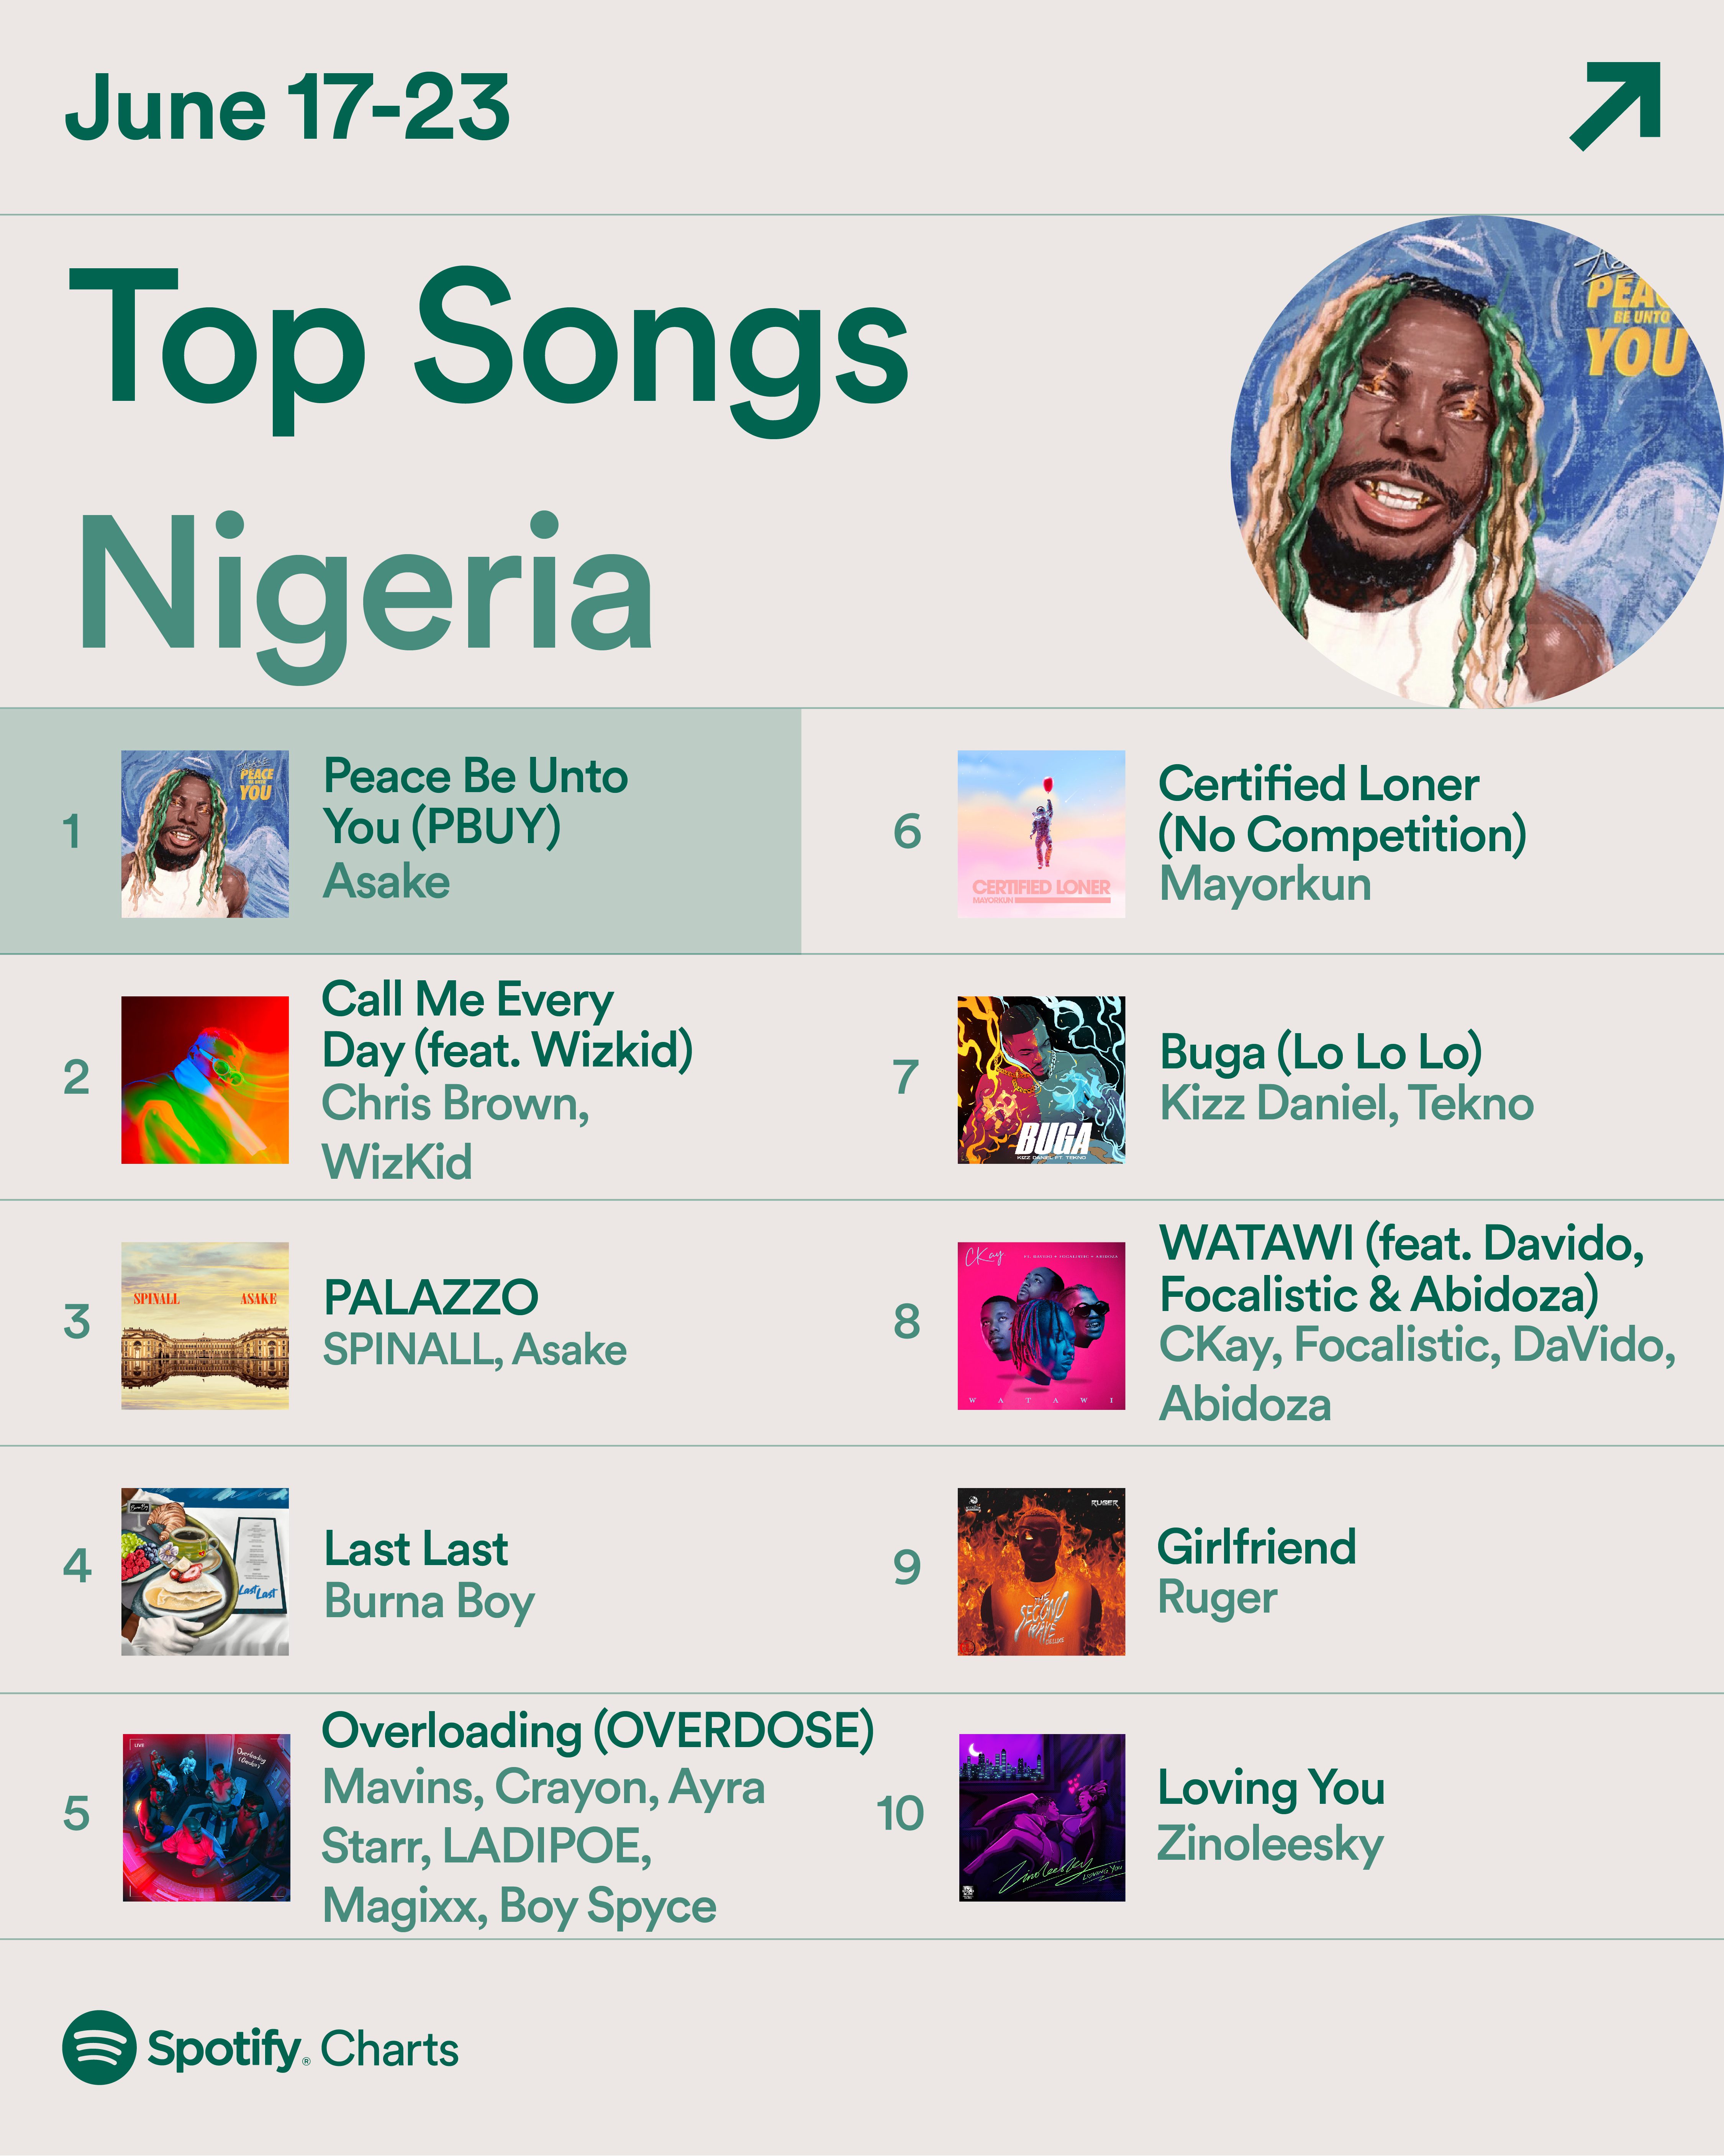 Top song lists Nigeria on Spotify this week